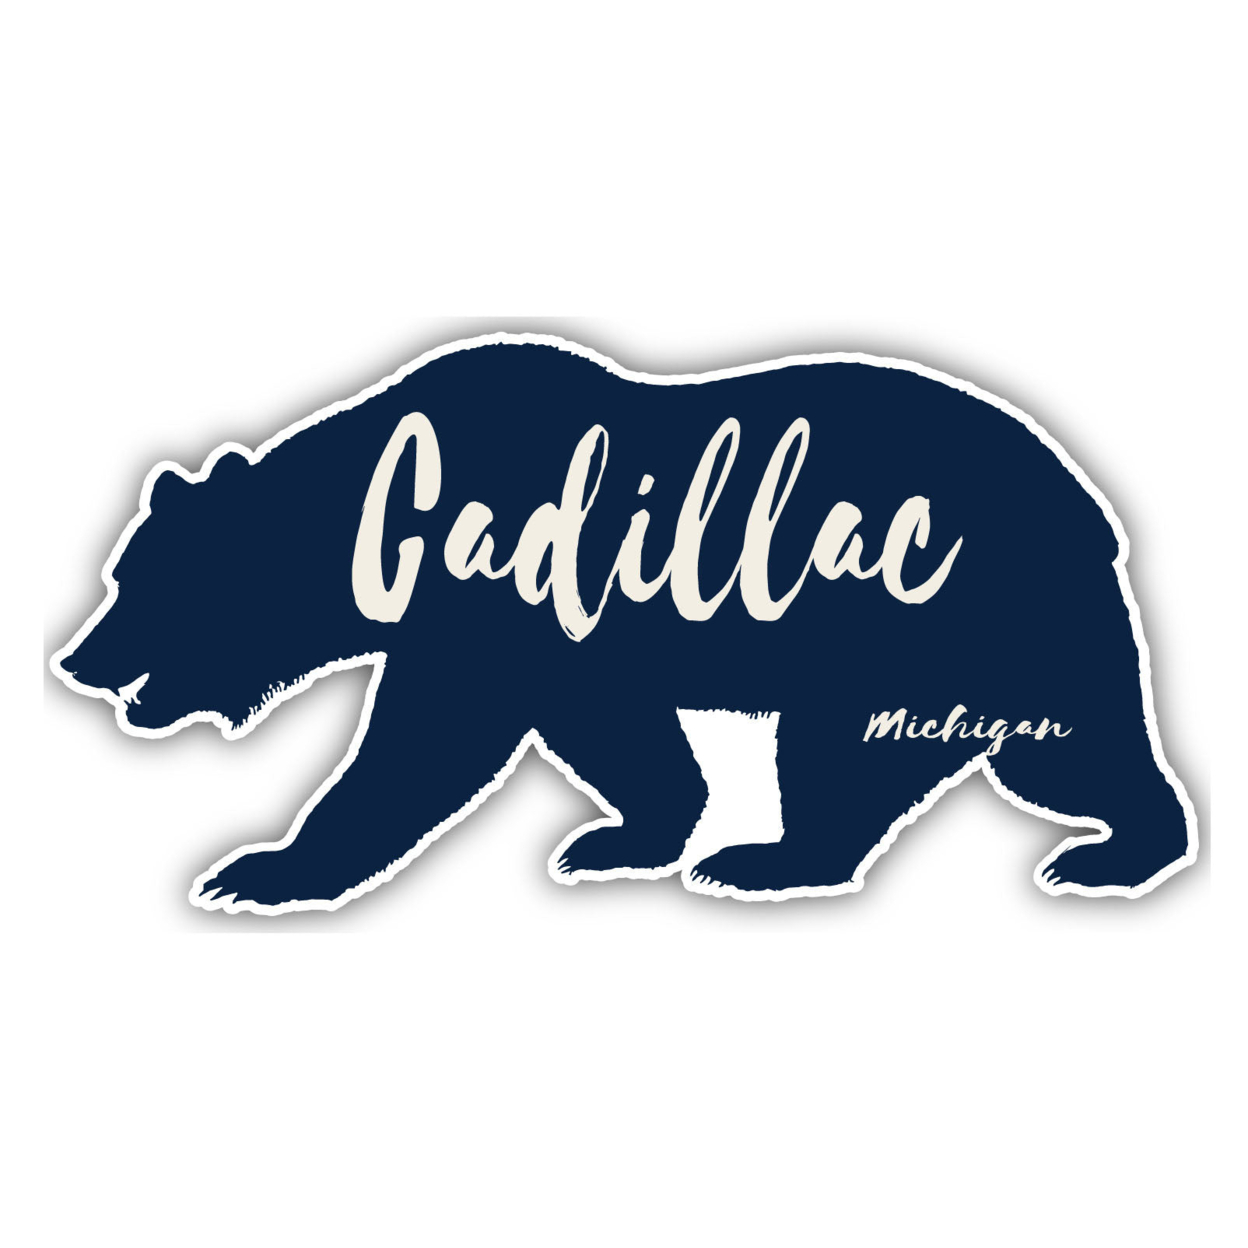 Cadillac Michigan Souvenir Decorative Stickers (Choose Theme And Size) - Single Unit, 6-Inch, Great Outdoors